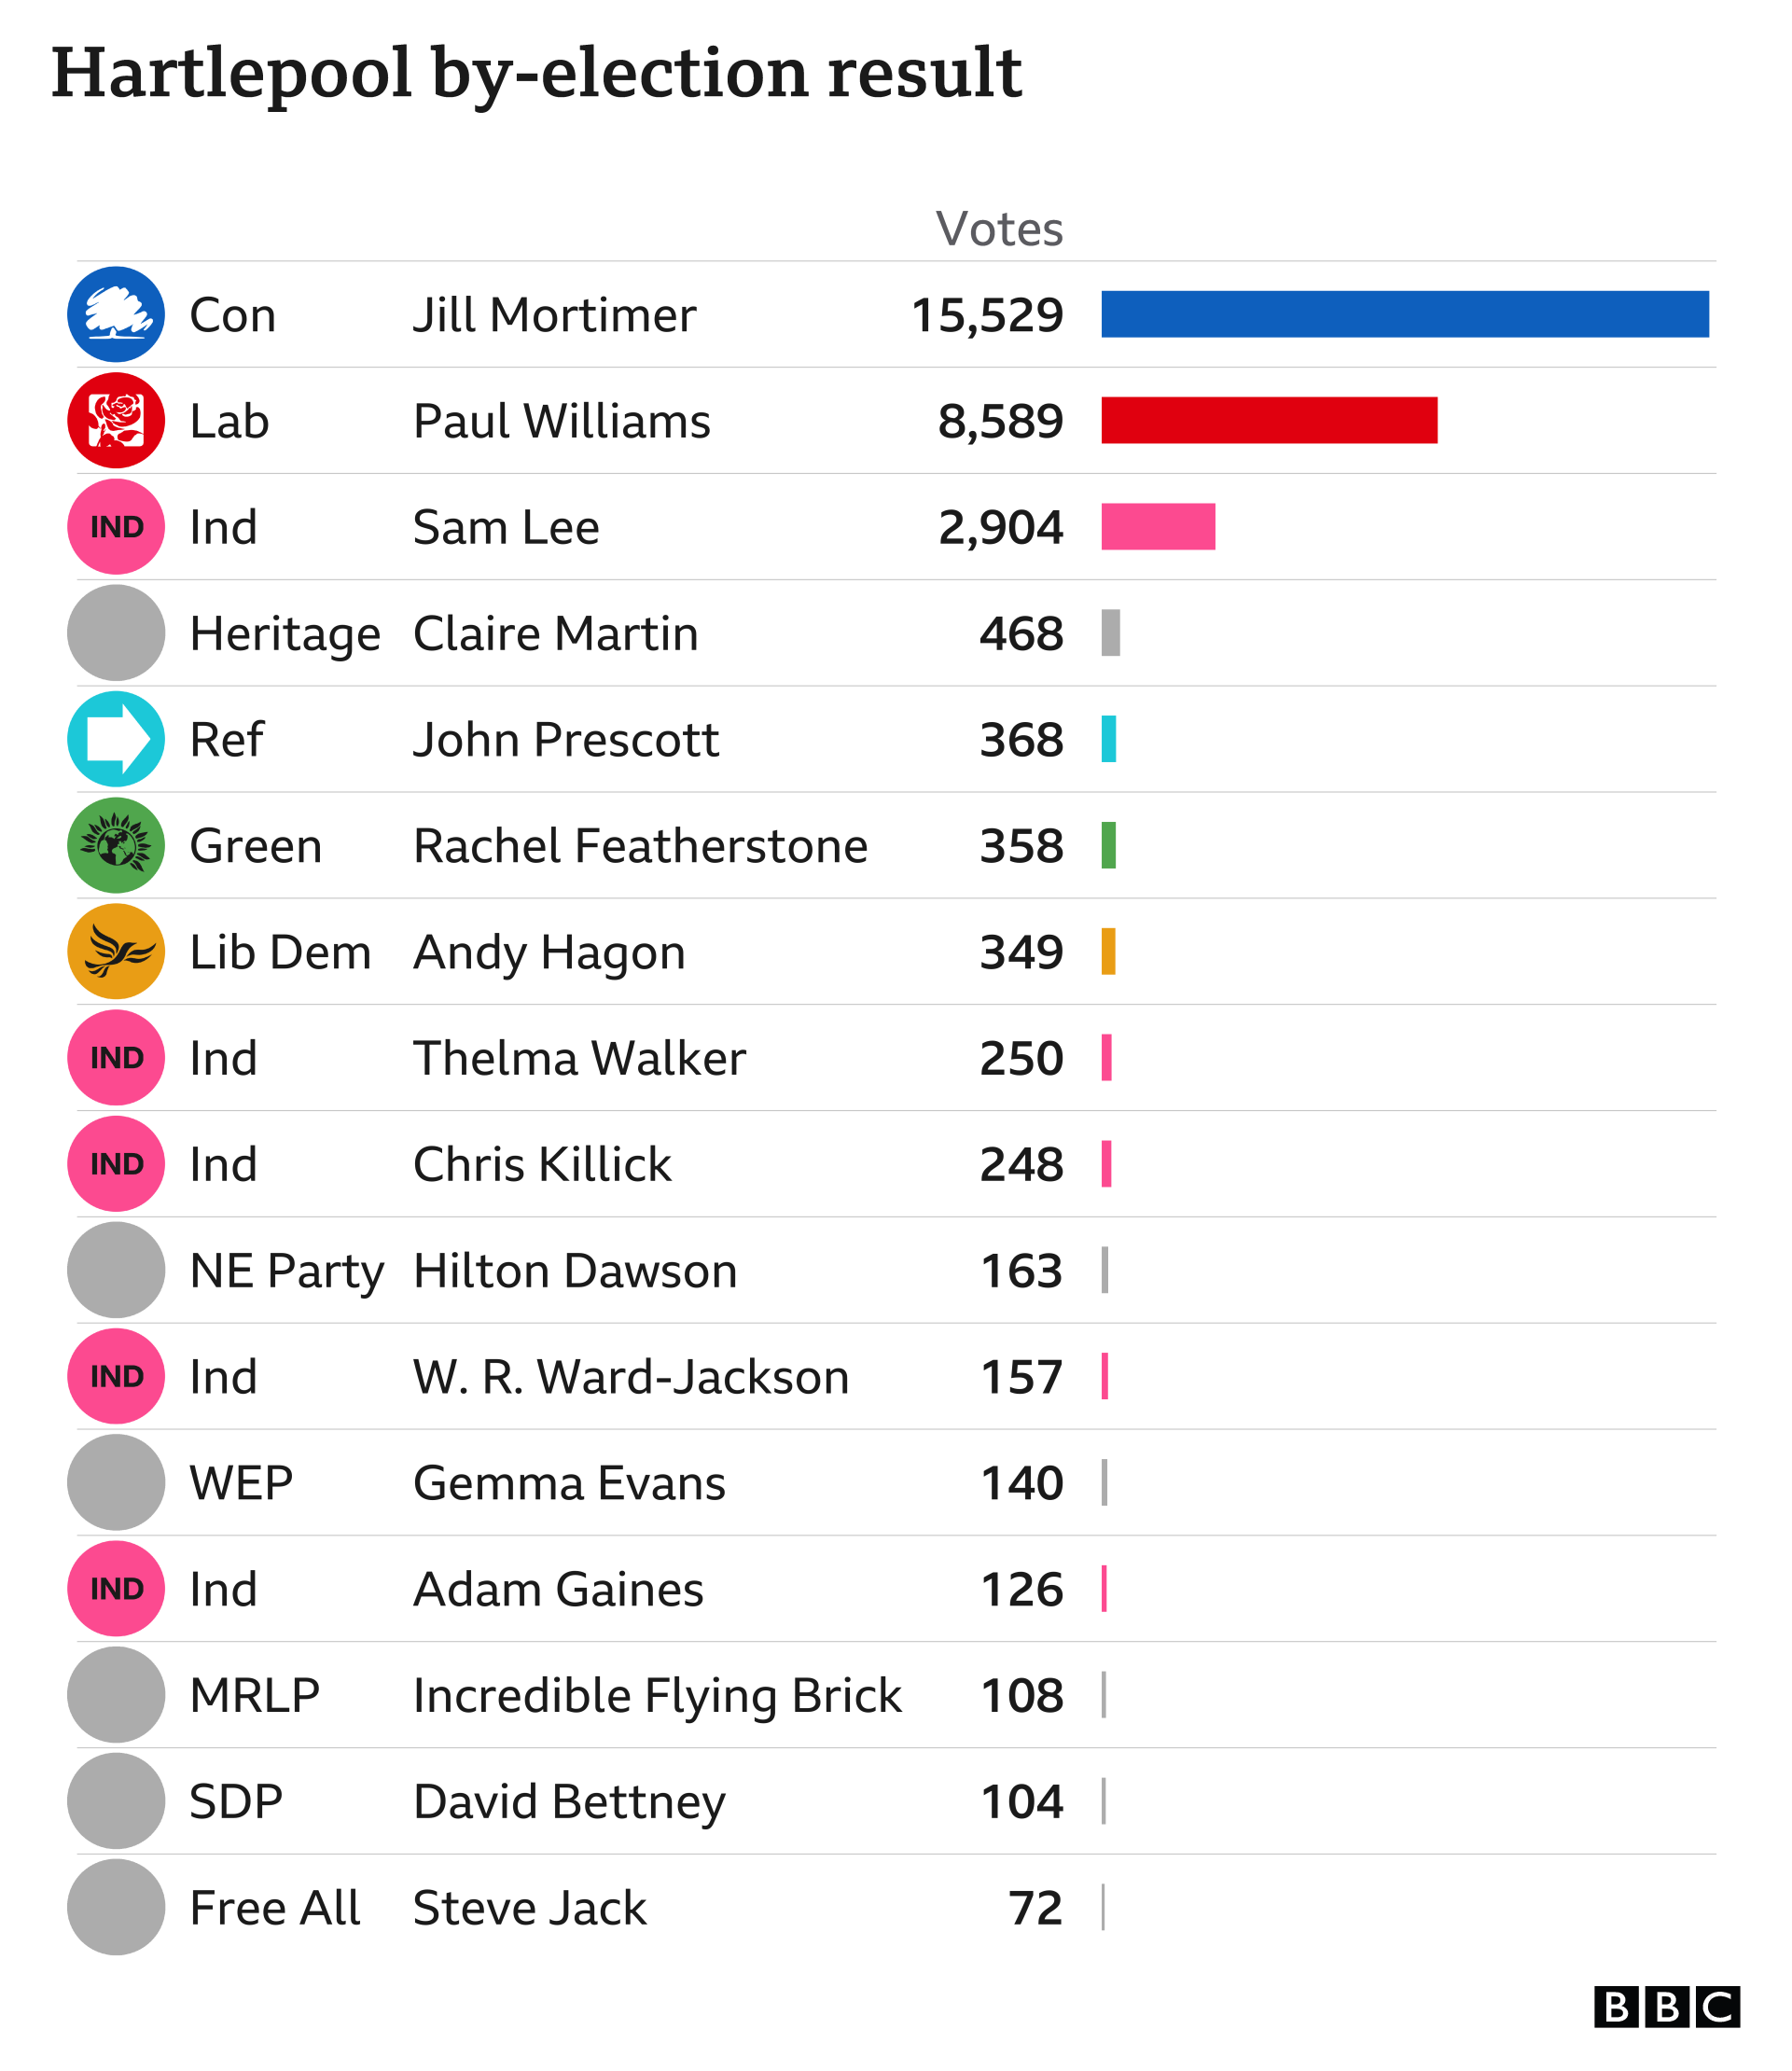 Full results from Hartlepool, the Conservatives got 1,529 votes compared to 8,589 for Labour